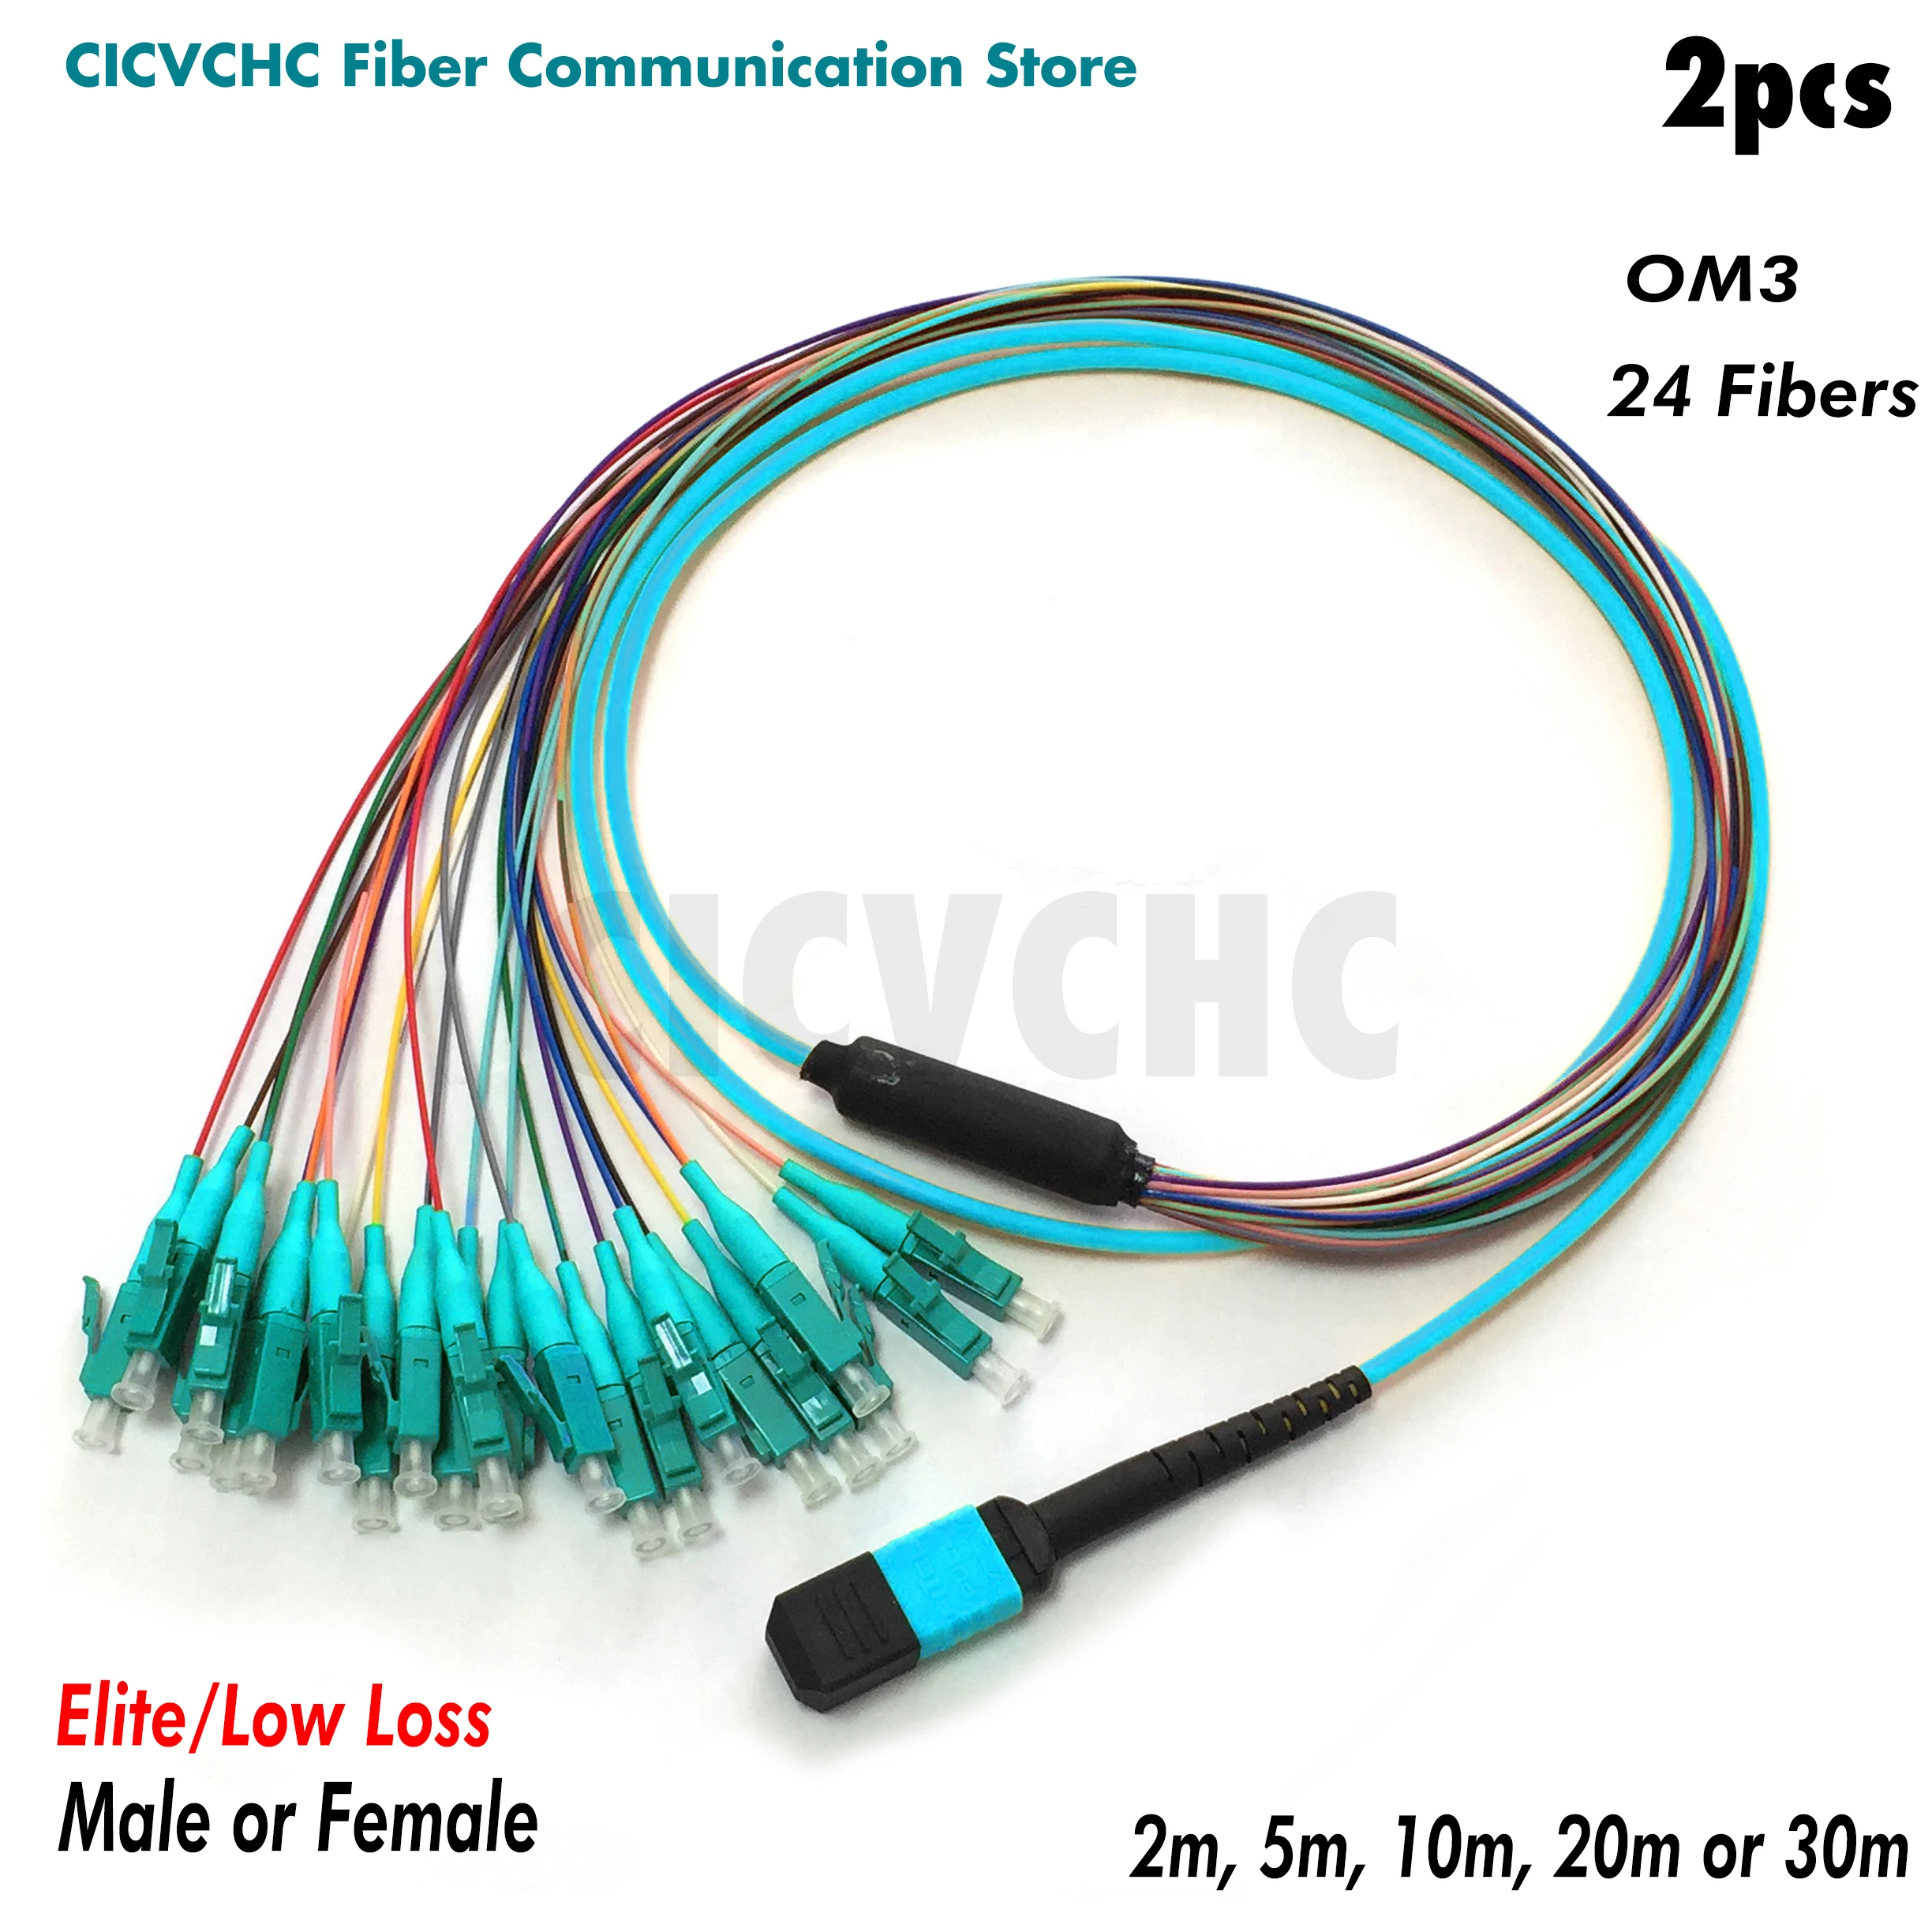 2pcs 24 fibers-MPO/UPC Fanout LC/UPC -OM3-Elite/Low loss-Male/Female with 0.9mm-2m to 30m/MPO Assembly